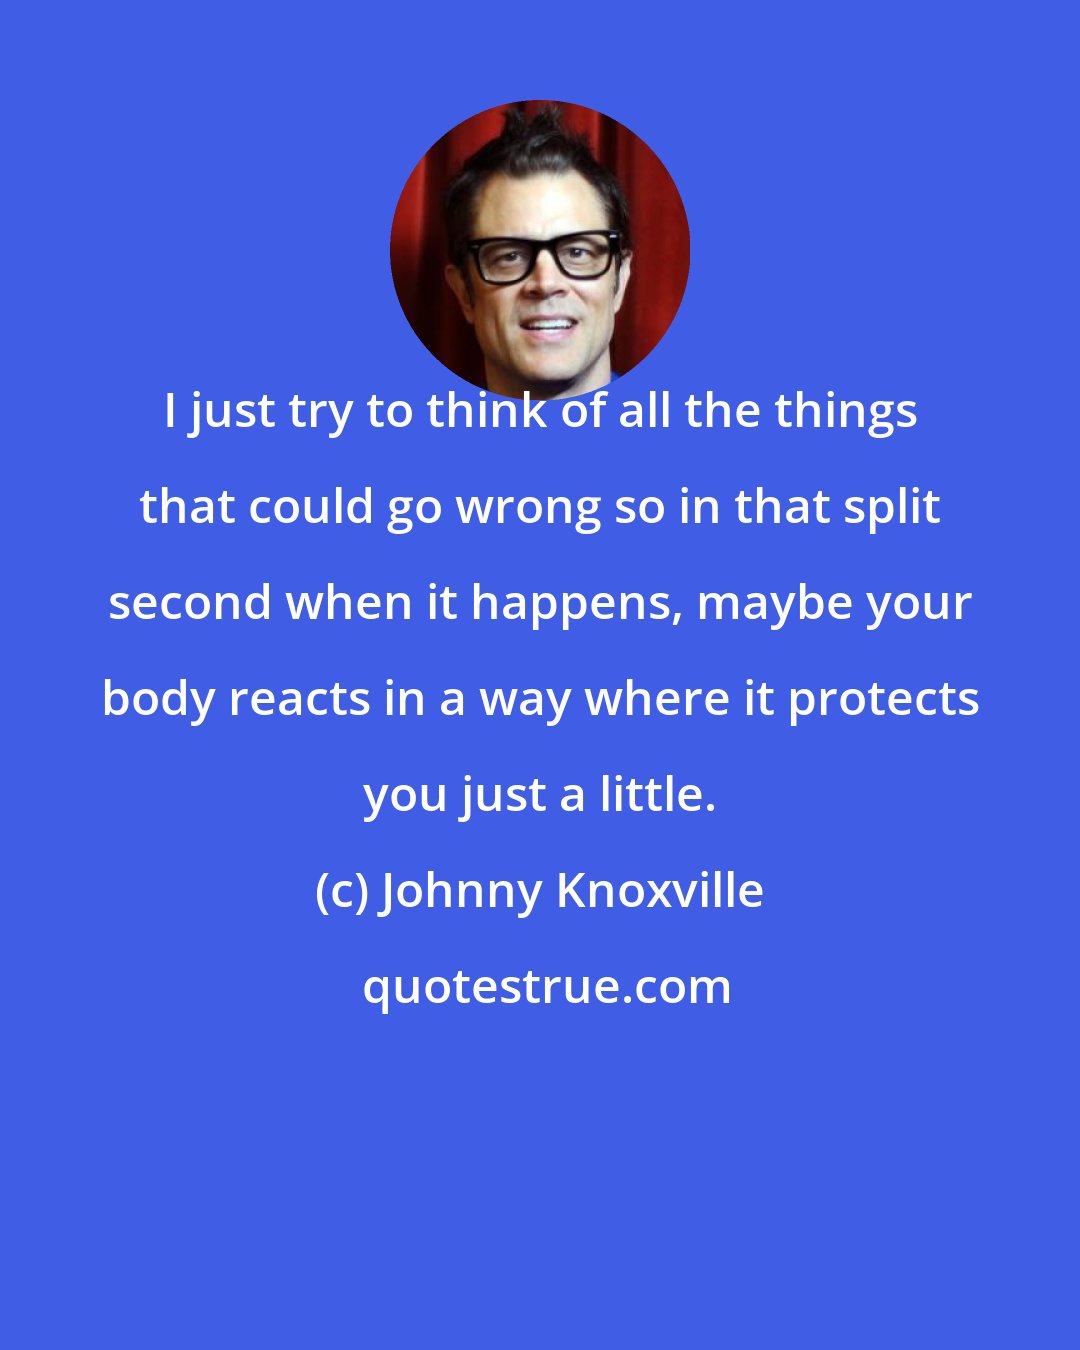 Johnny Knoxville: I just try to think of all the things that could go wrong so in that split second when it happens, maybe your body reacts in a way where it protects you just a little.